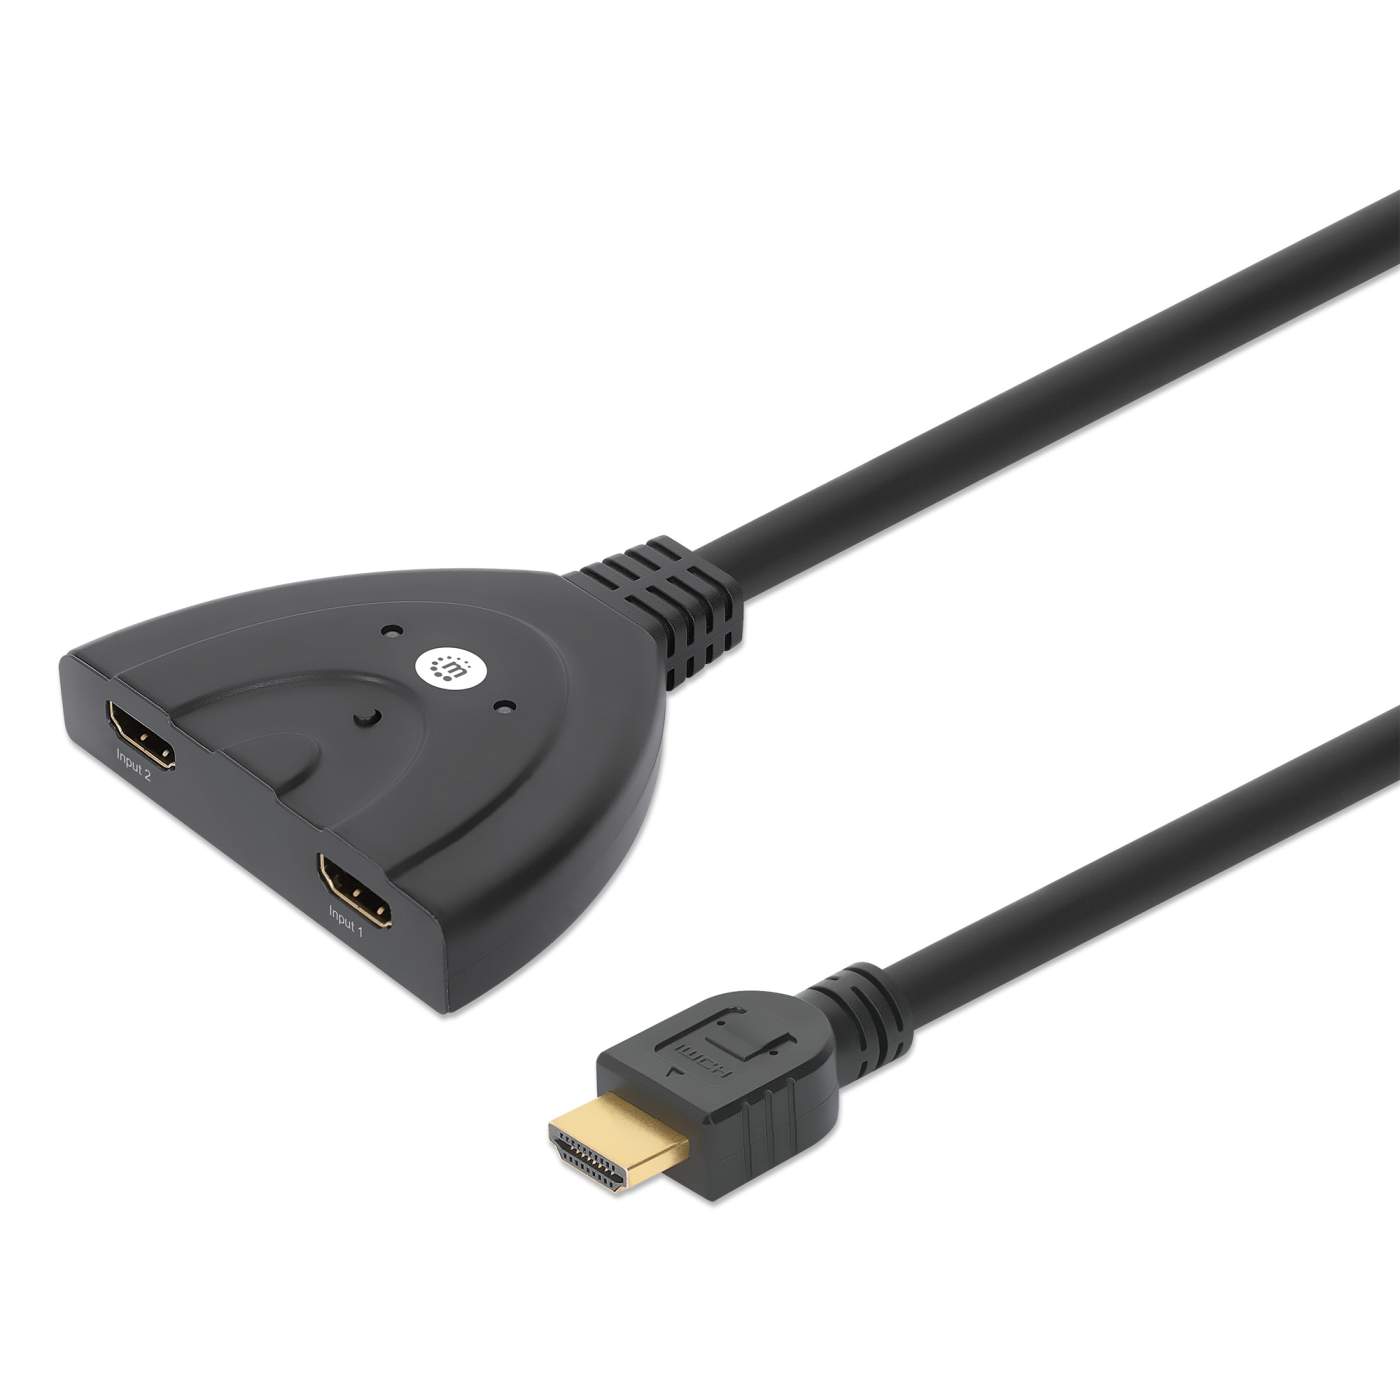 For Smart Device USB 2.0 To HDMI 50cm USB Power Cable to HDMI